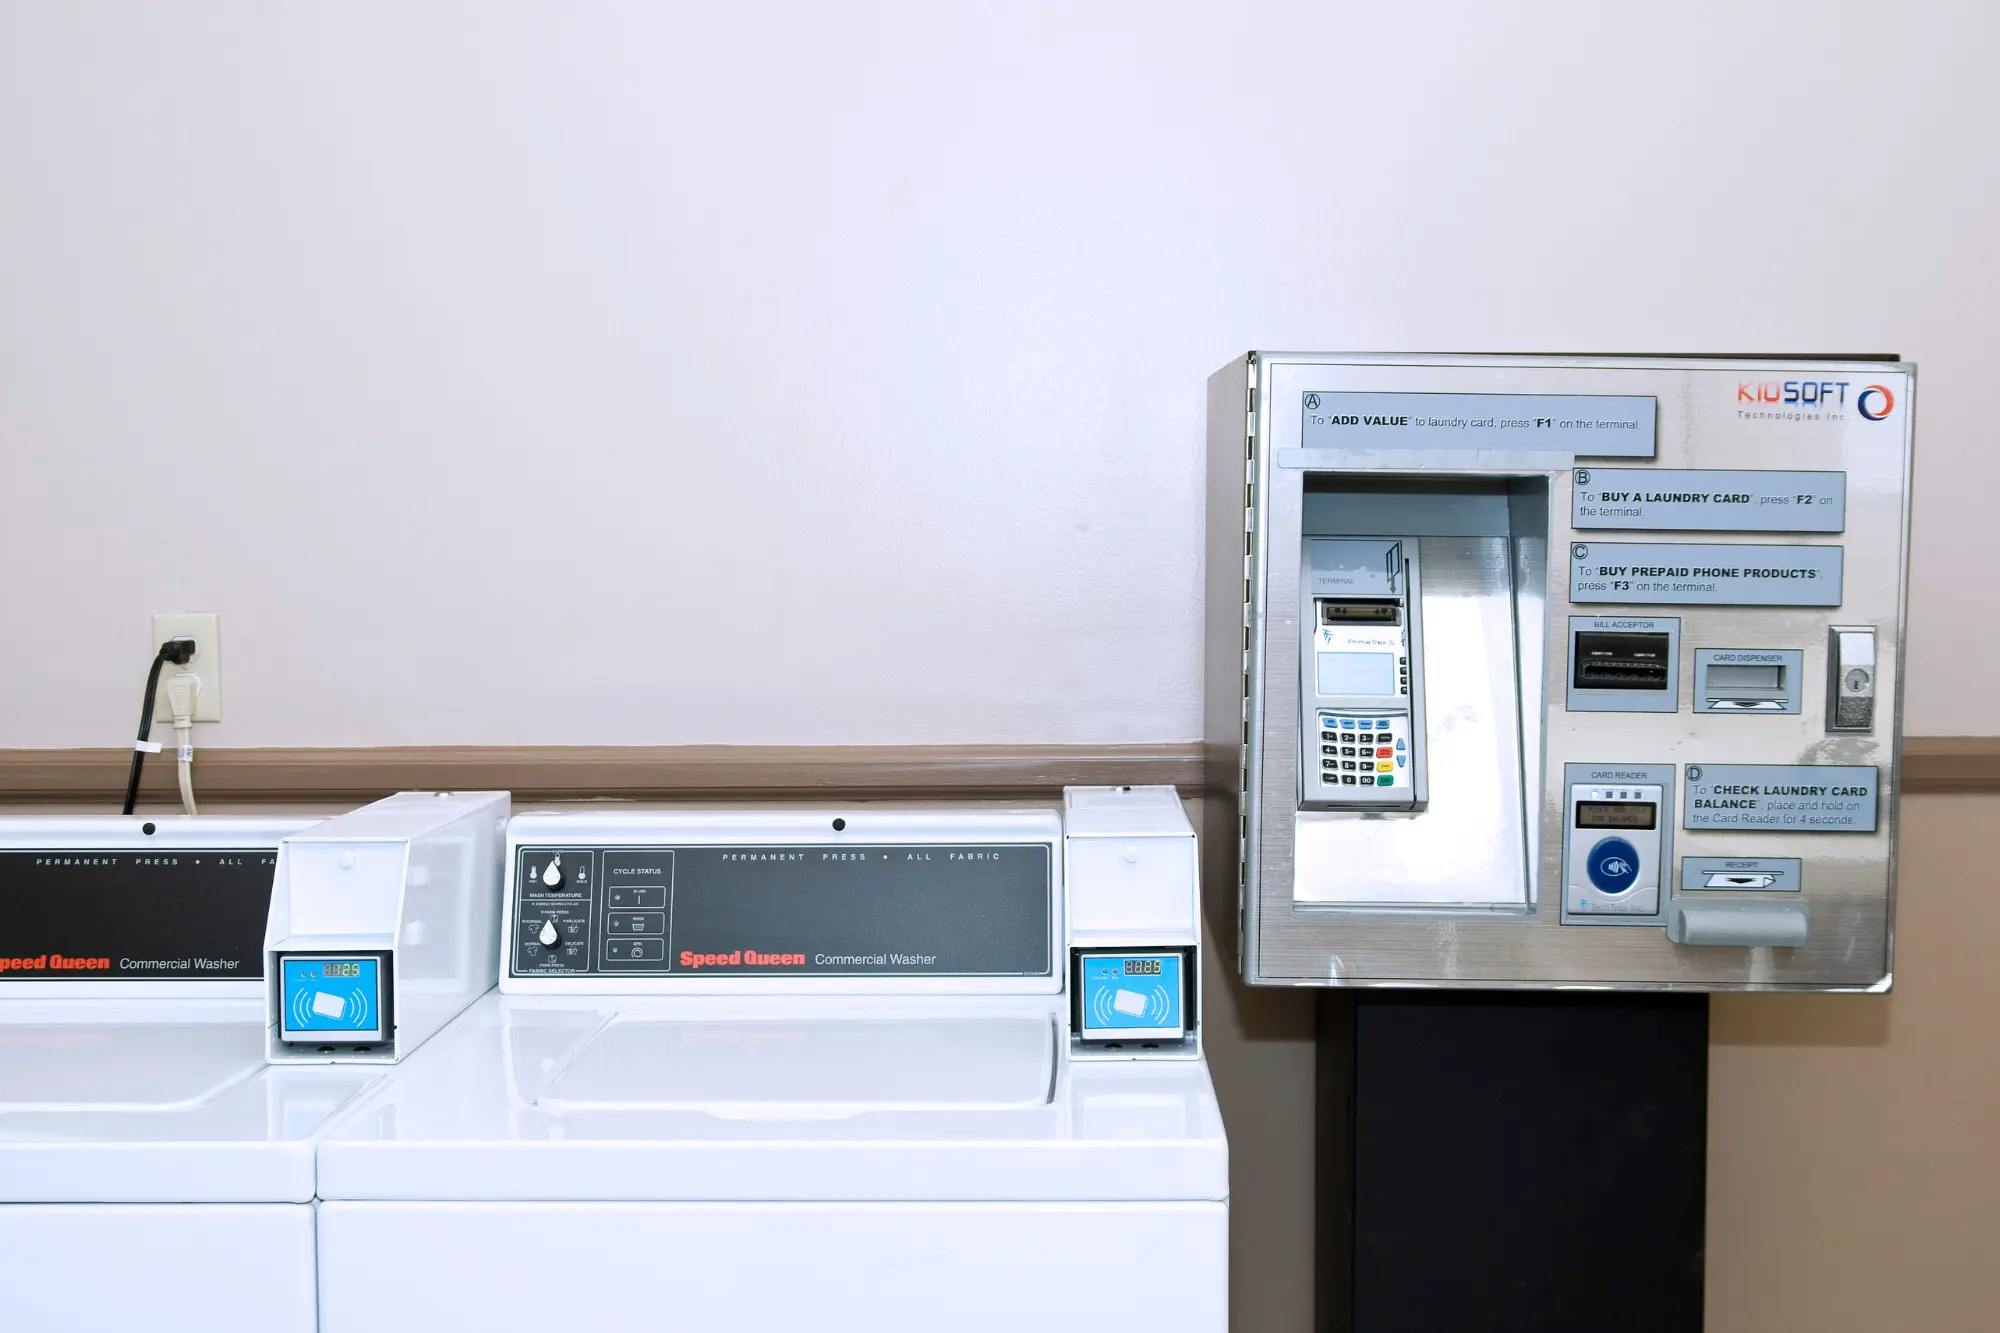 WHAT ARE THE BENEFITS OF A SPEED QUEEN WASHER CARD READER FOR BUSINESSES?